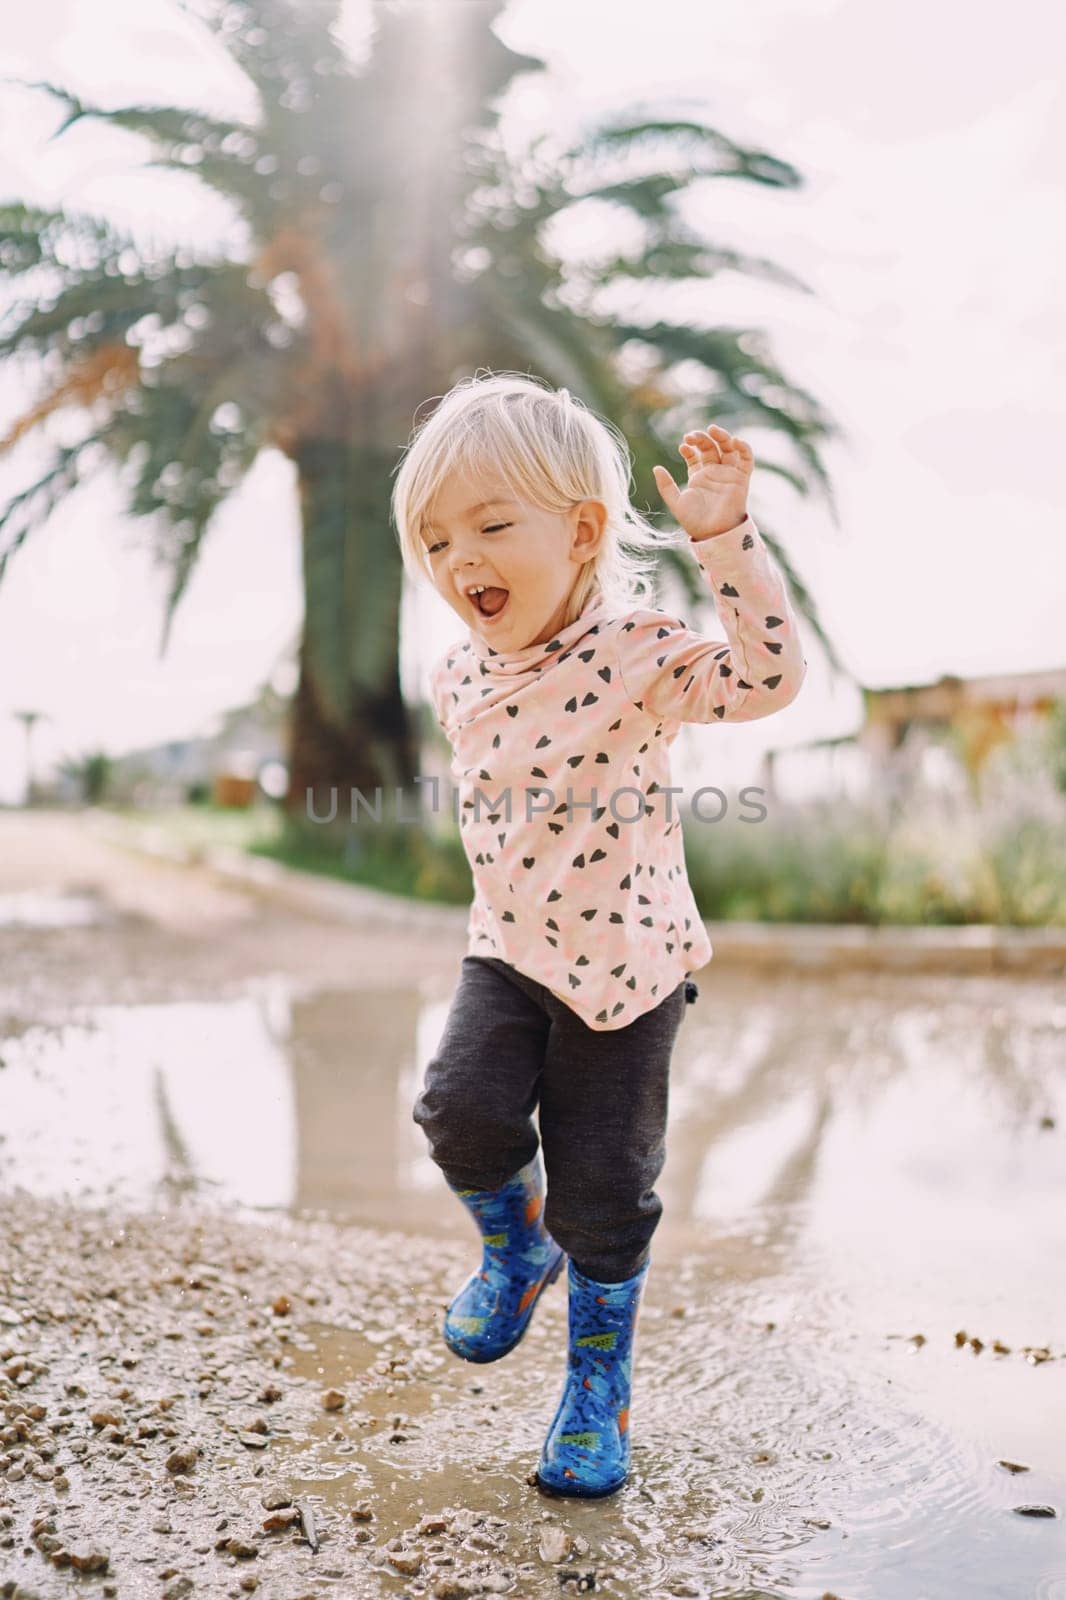 Smiling little girl in rubber boots jumping on a puddle by Nadtochiy